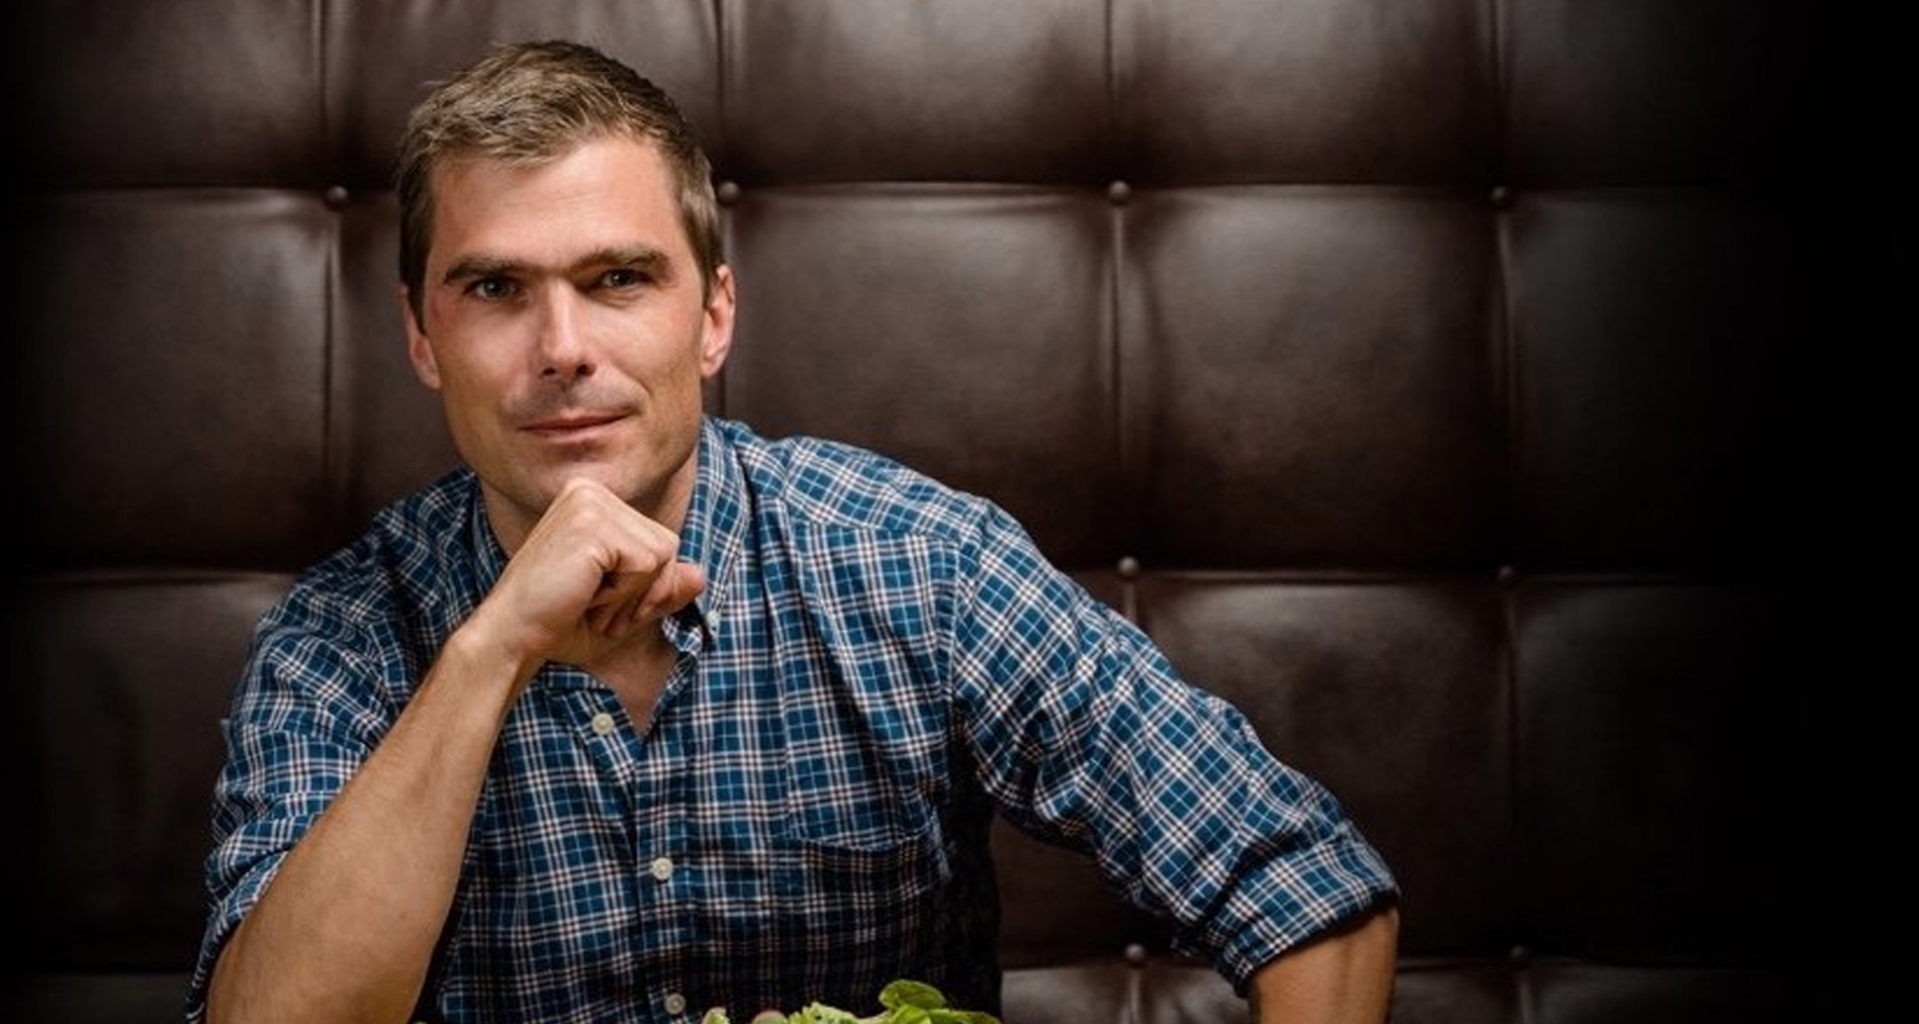 A headshot of chef Hugh Acheson sitting down to eat a plate of salad.